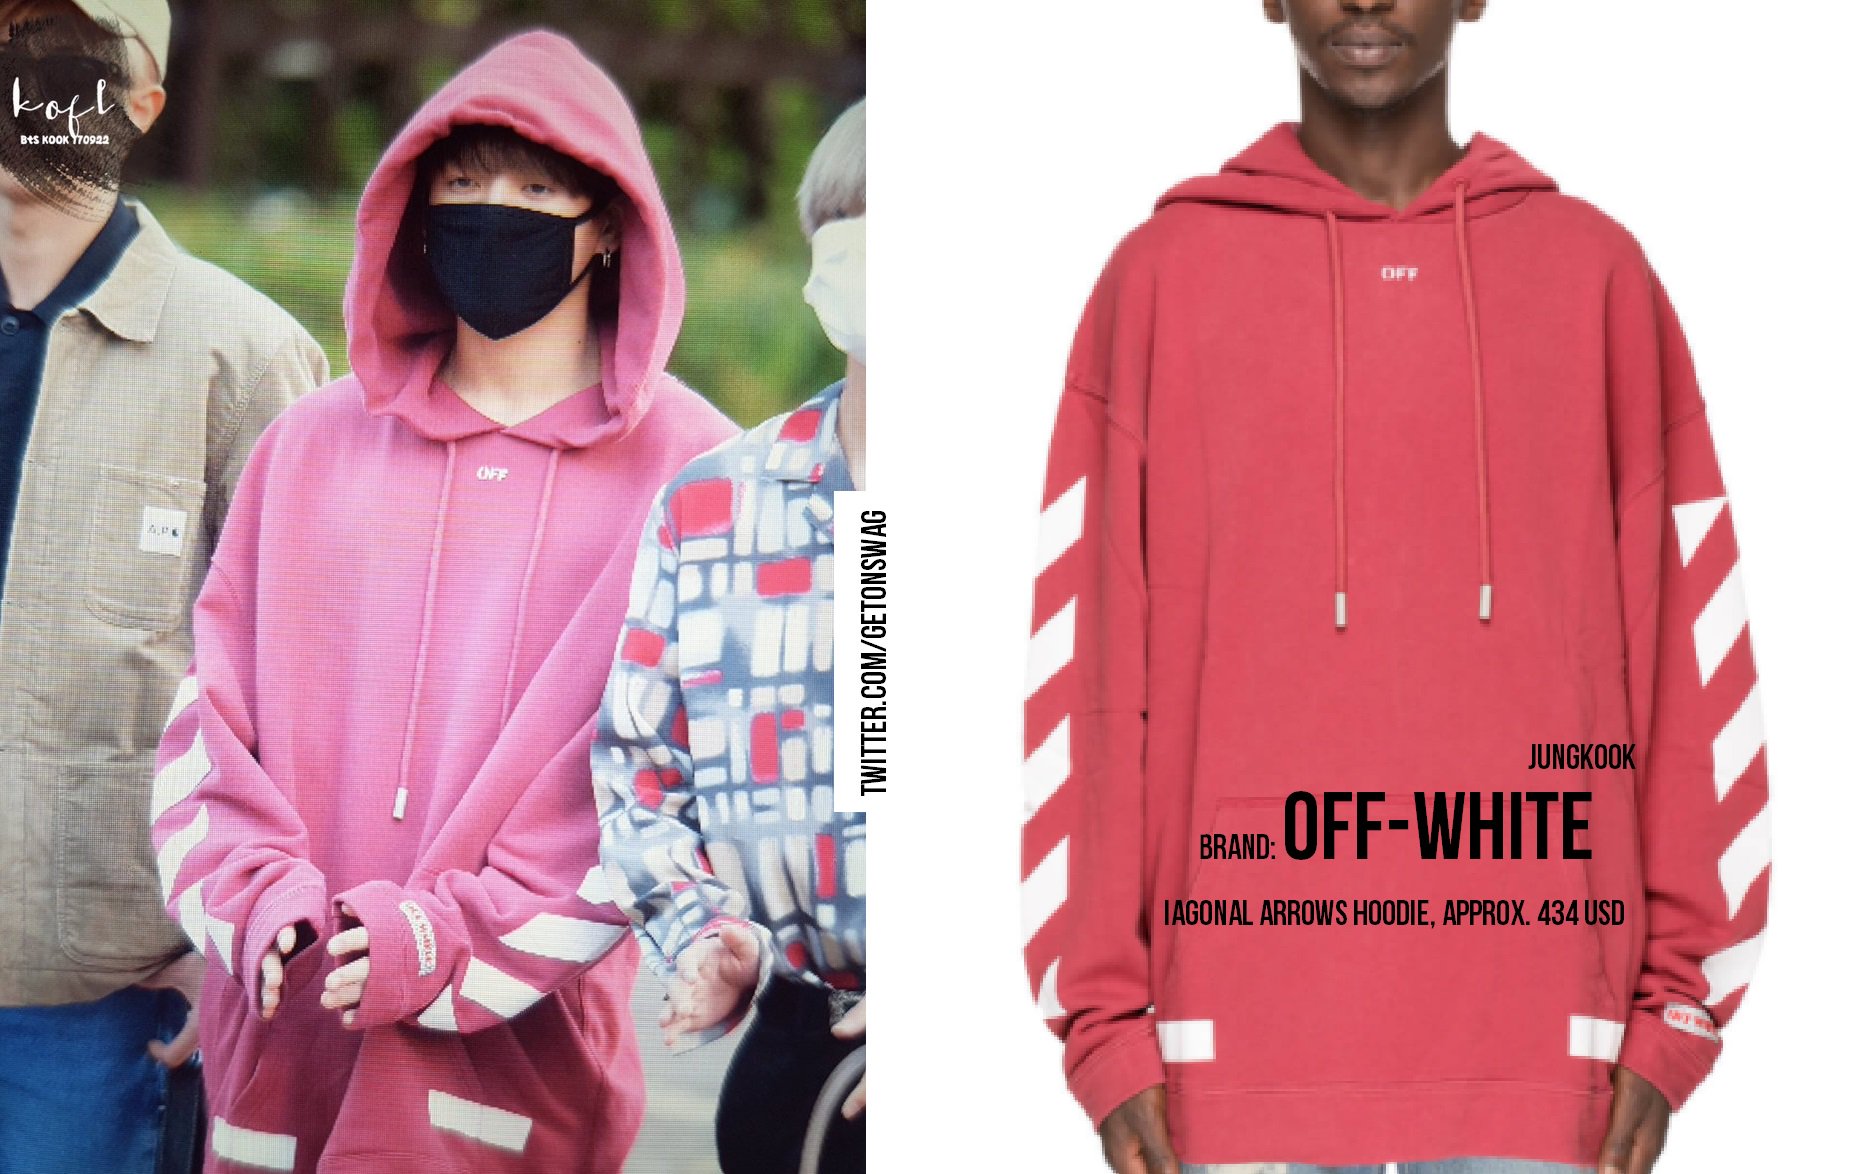 Ung dame entusiasme Modsige Beyond The Style ✼ Alex ✼ on Twitter: "JUNGKOOK #BTS 170929 #JUNGKOOK #정국  #방탄소년단 Off-White - Diagonal arrows hoodie https://t.co/725HOHYEEF" / Twitter